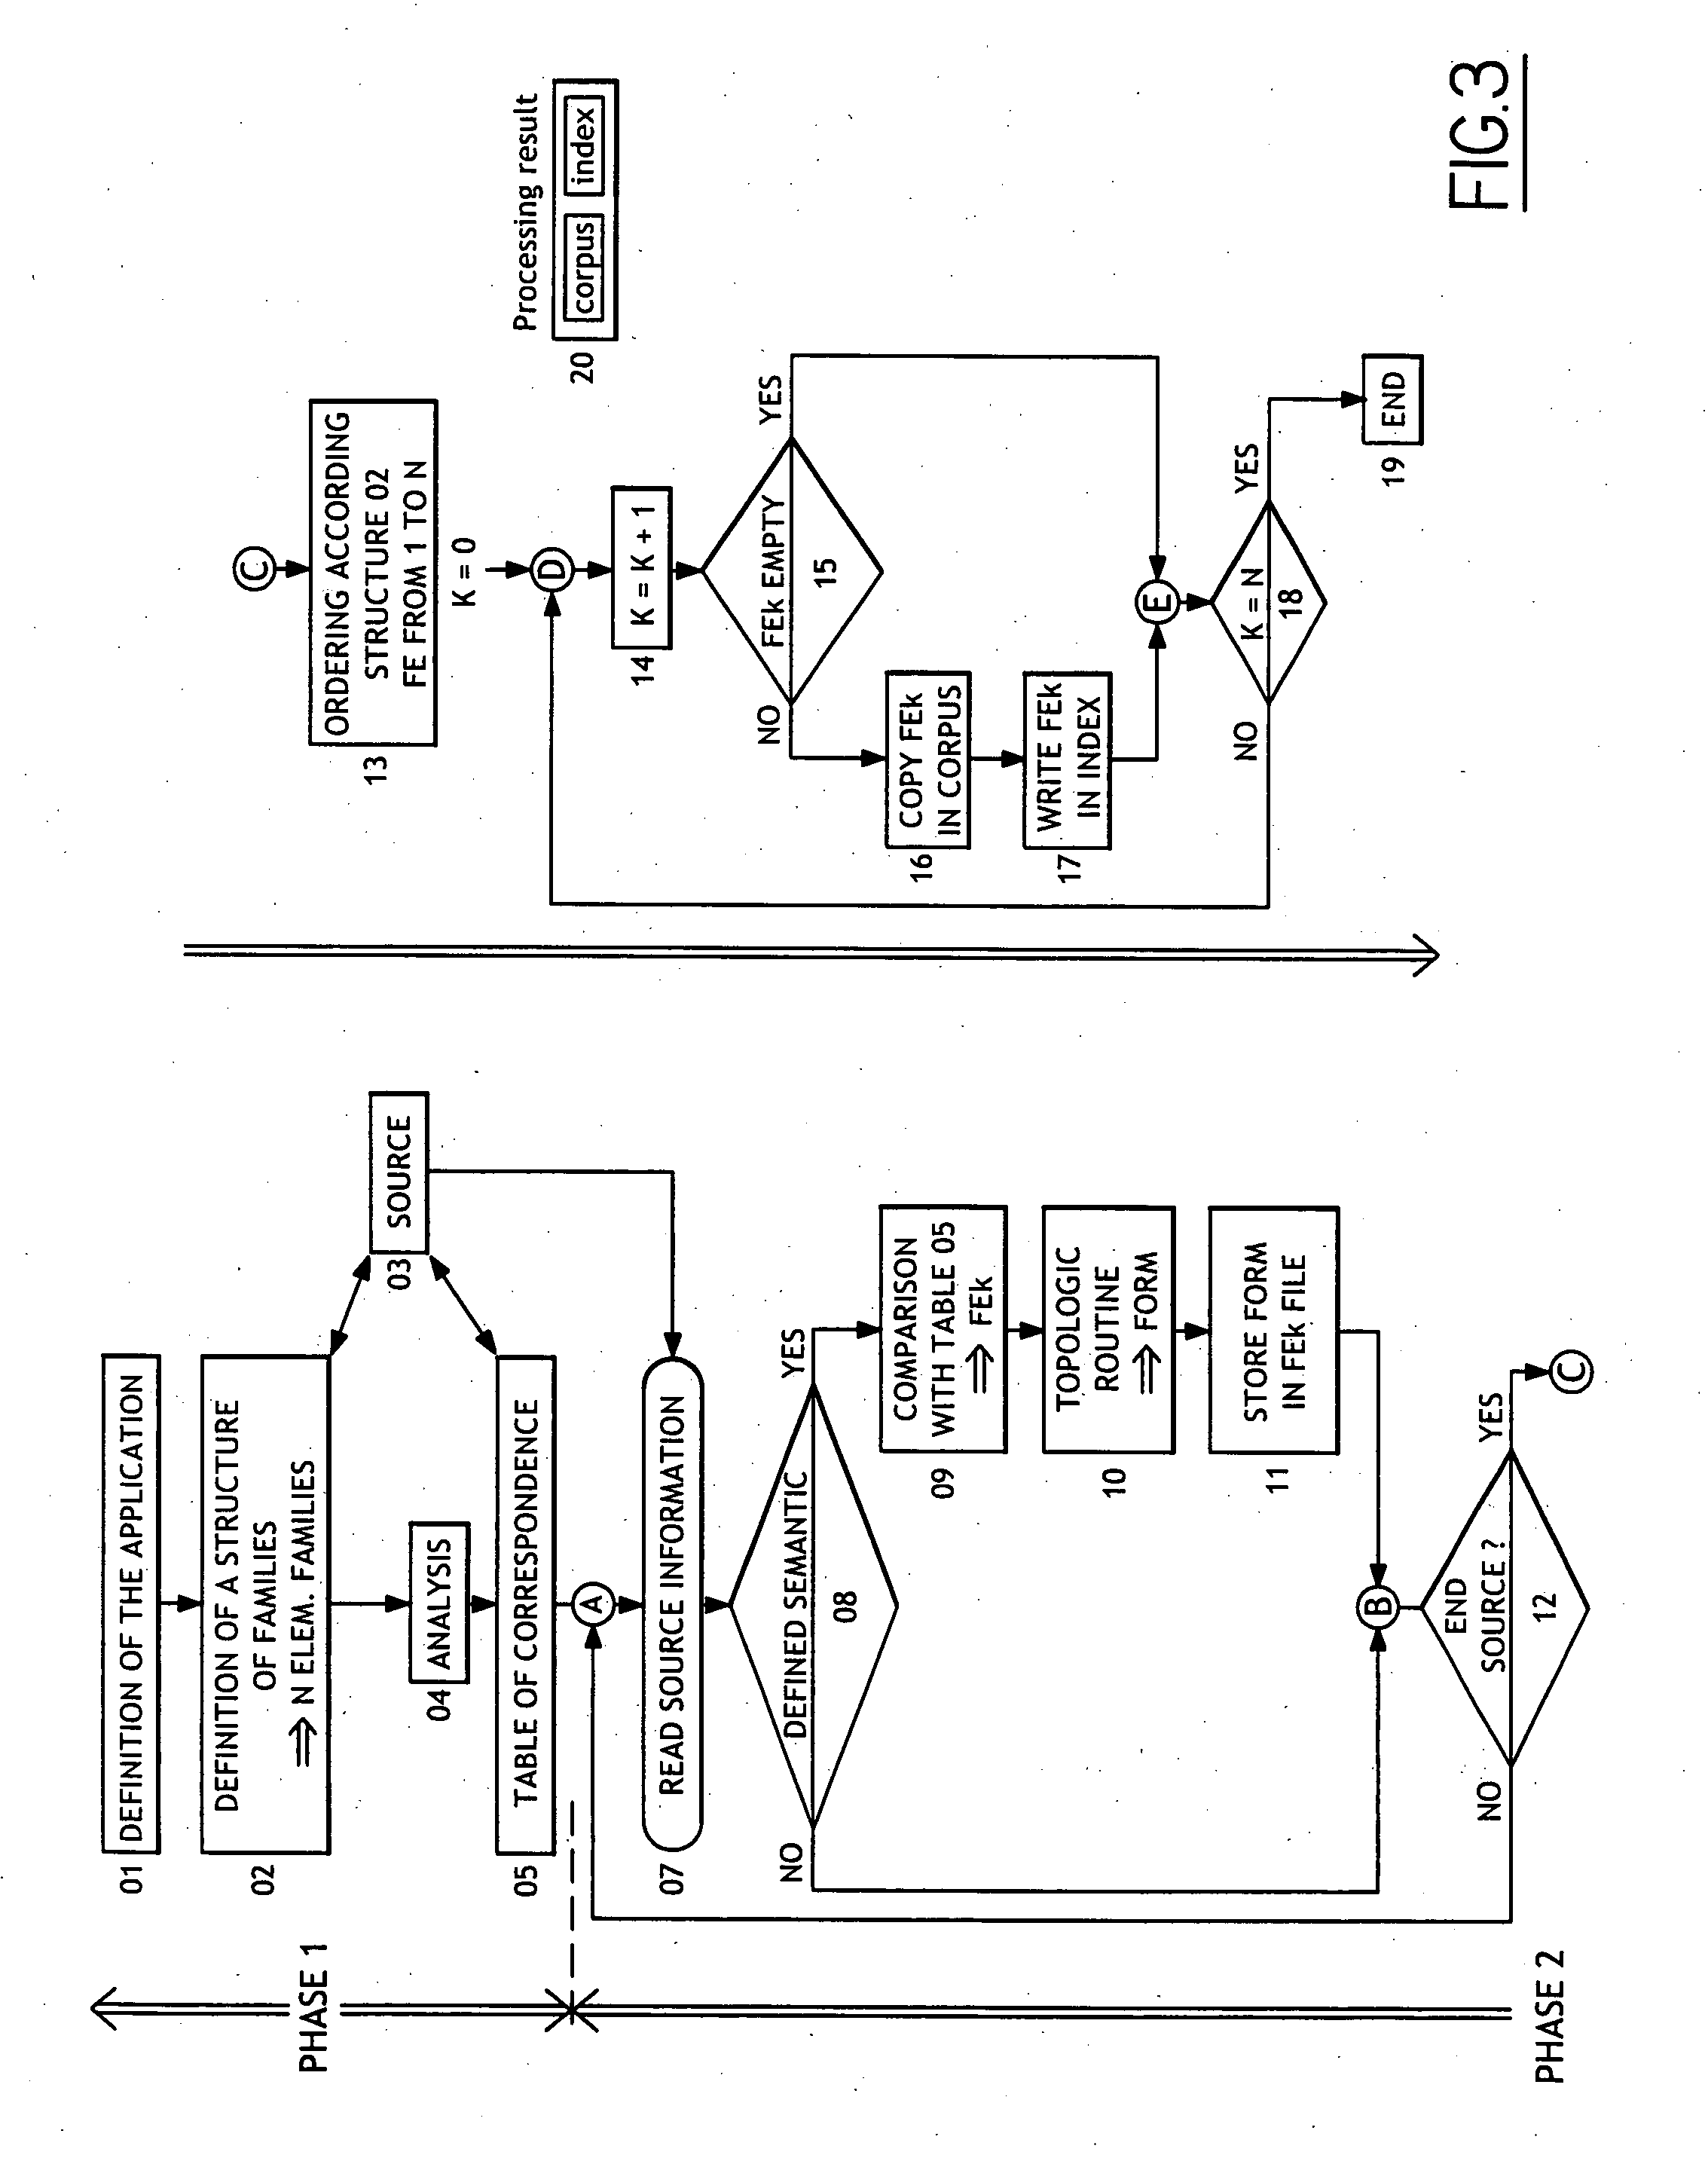 Method and system for processing spatially-referred information such as cartographic information, applications and apparatus implementing said method